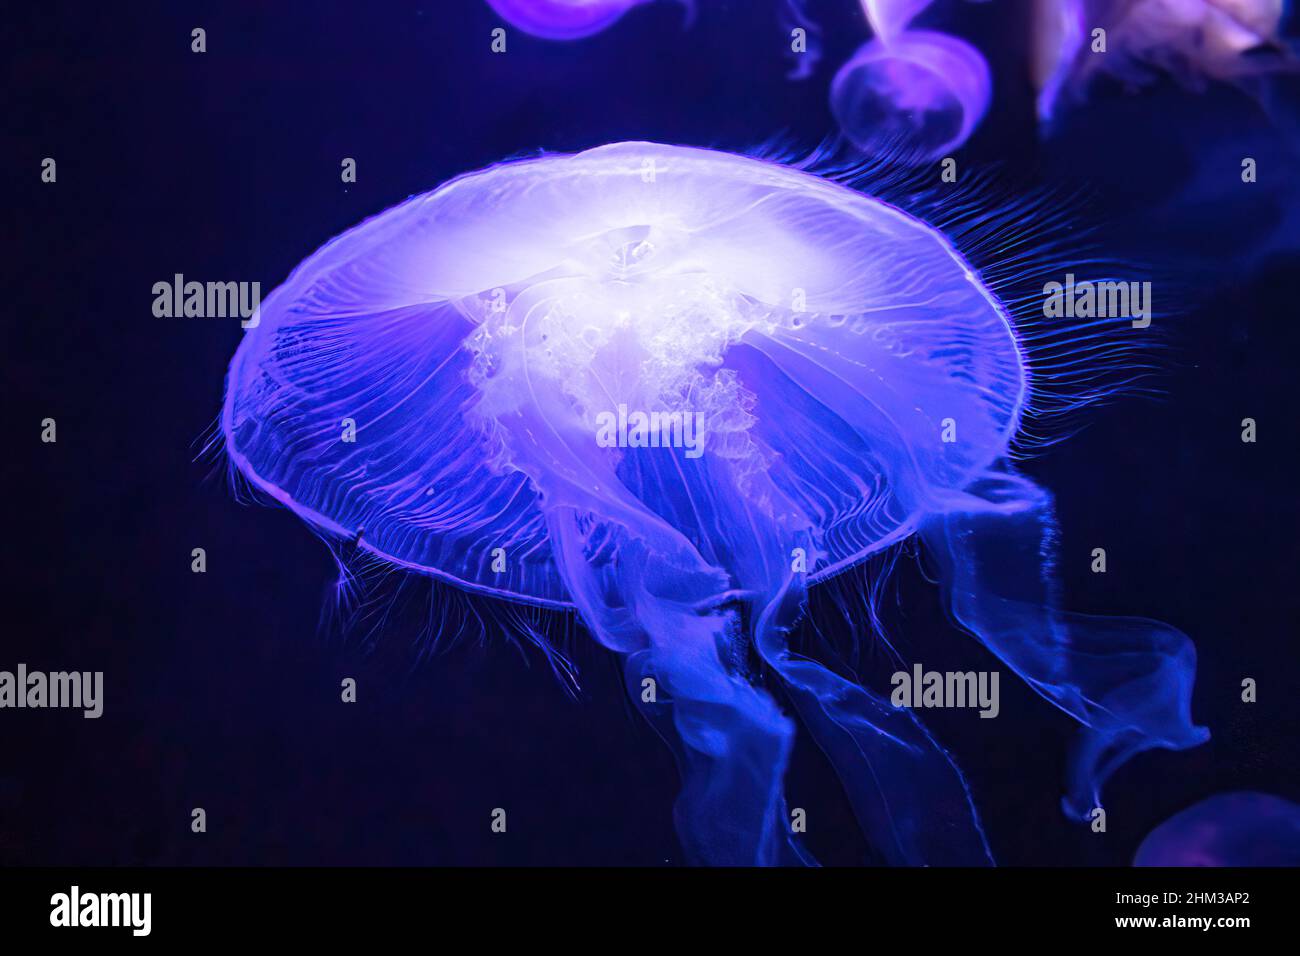 Moon Jellyfish floating in fluorescent aquarium. Moon Jellyfish is an Aurelia aurita species living in tropical waters of the Indian, Pacific and Stock Photo